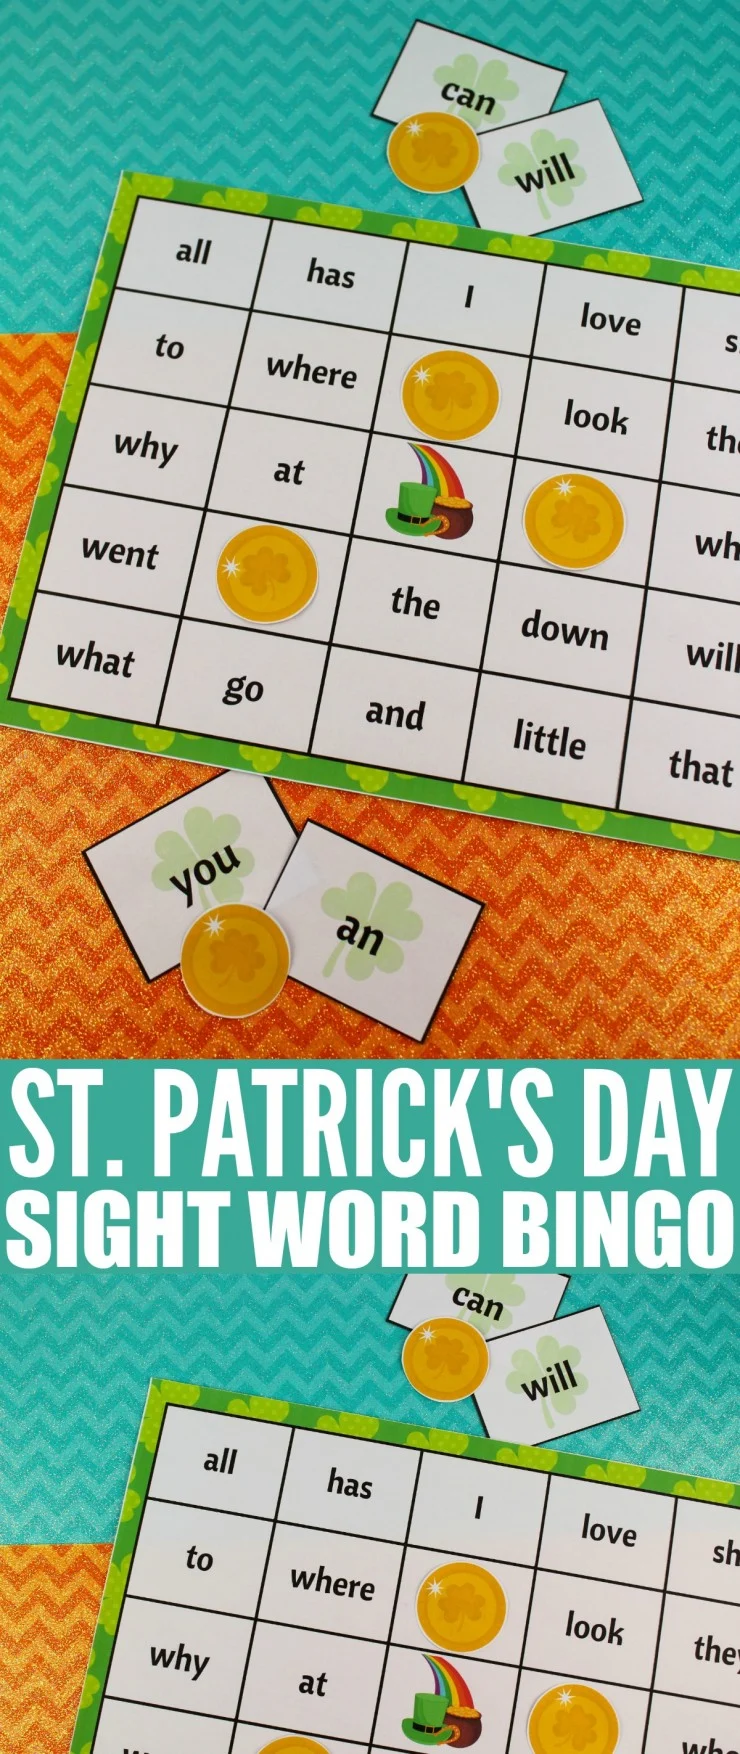 This free printable St. Patrick's Day Sight Word Bingo set are a super fun way to celebrate St. Patrick's Day while learning! Use them in the classroom or at home, early readers will love to play this sight word bingo game!